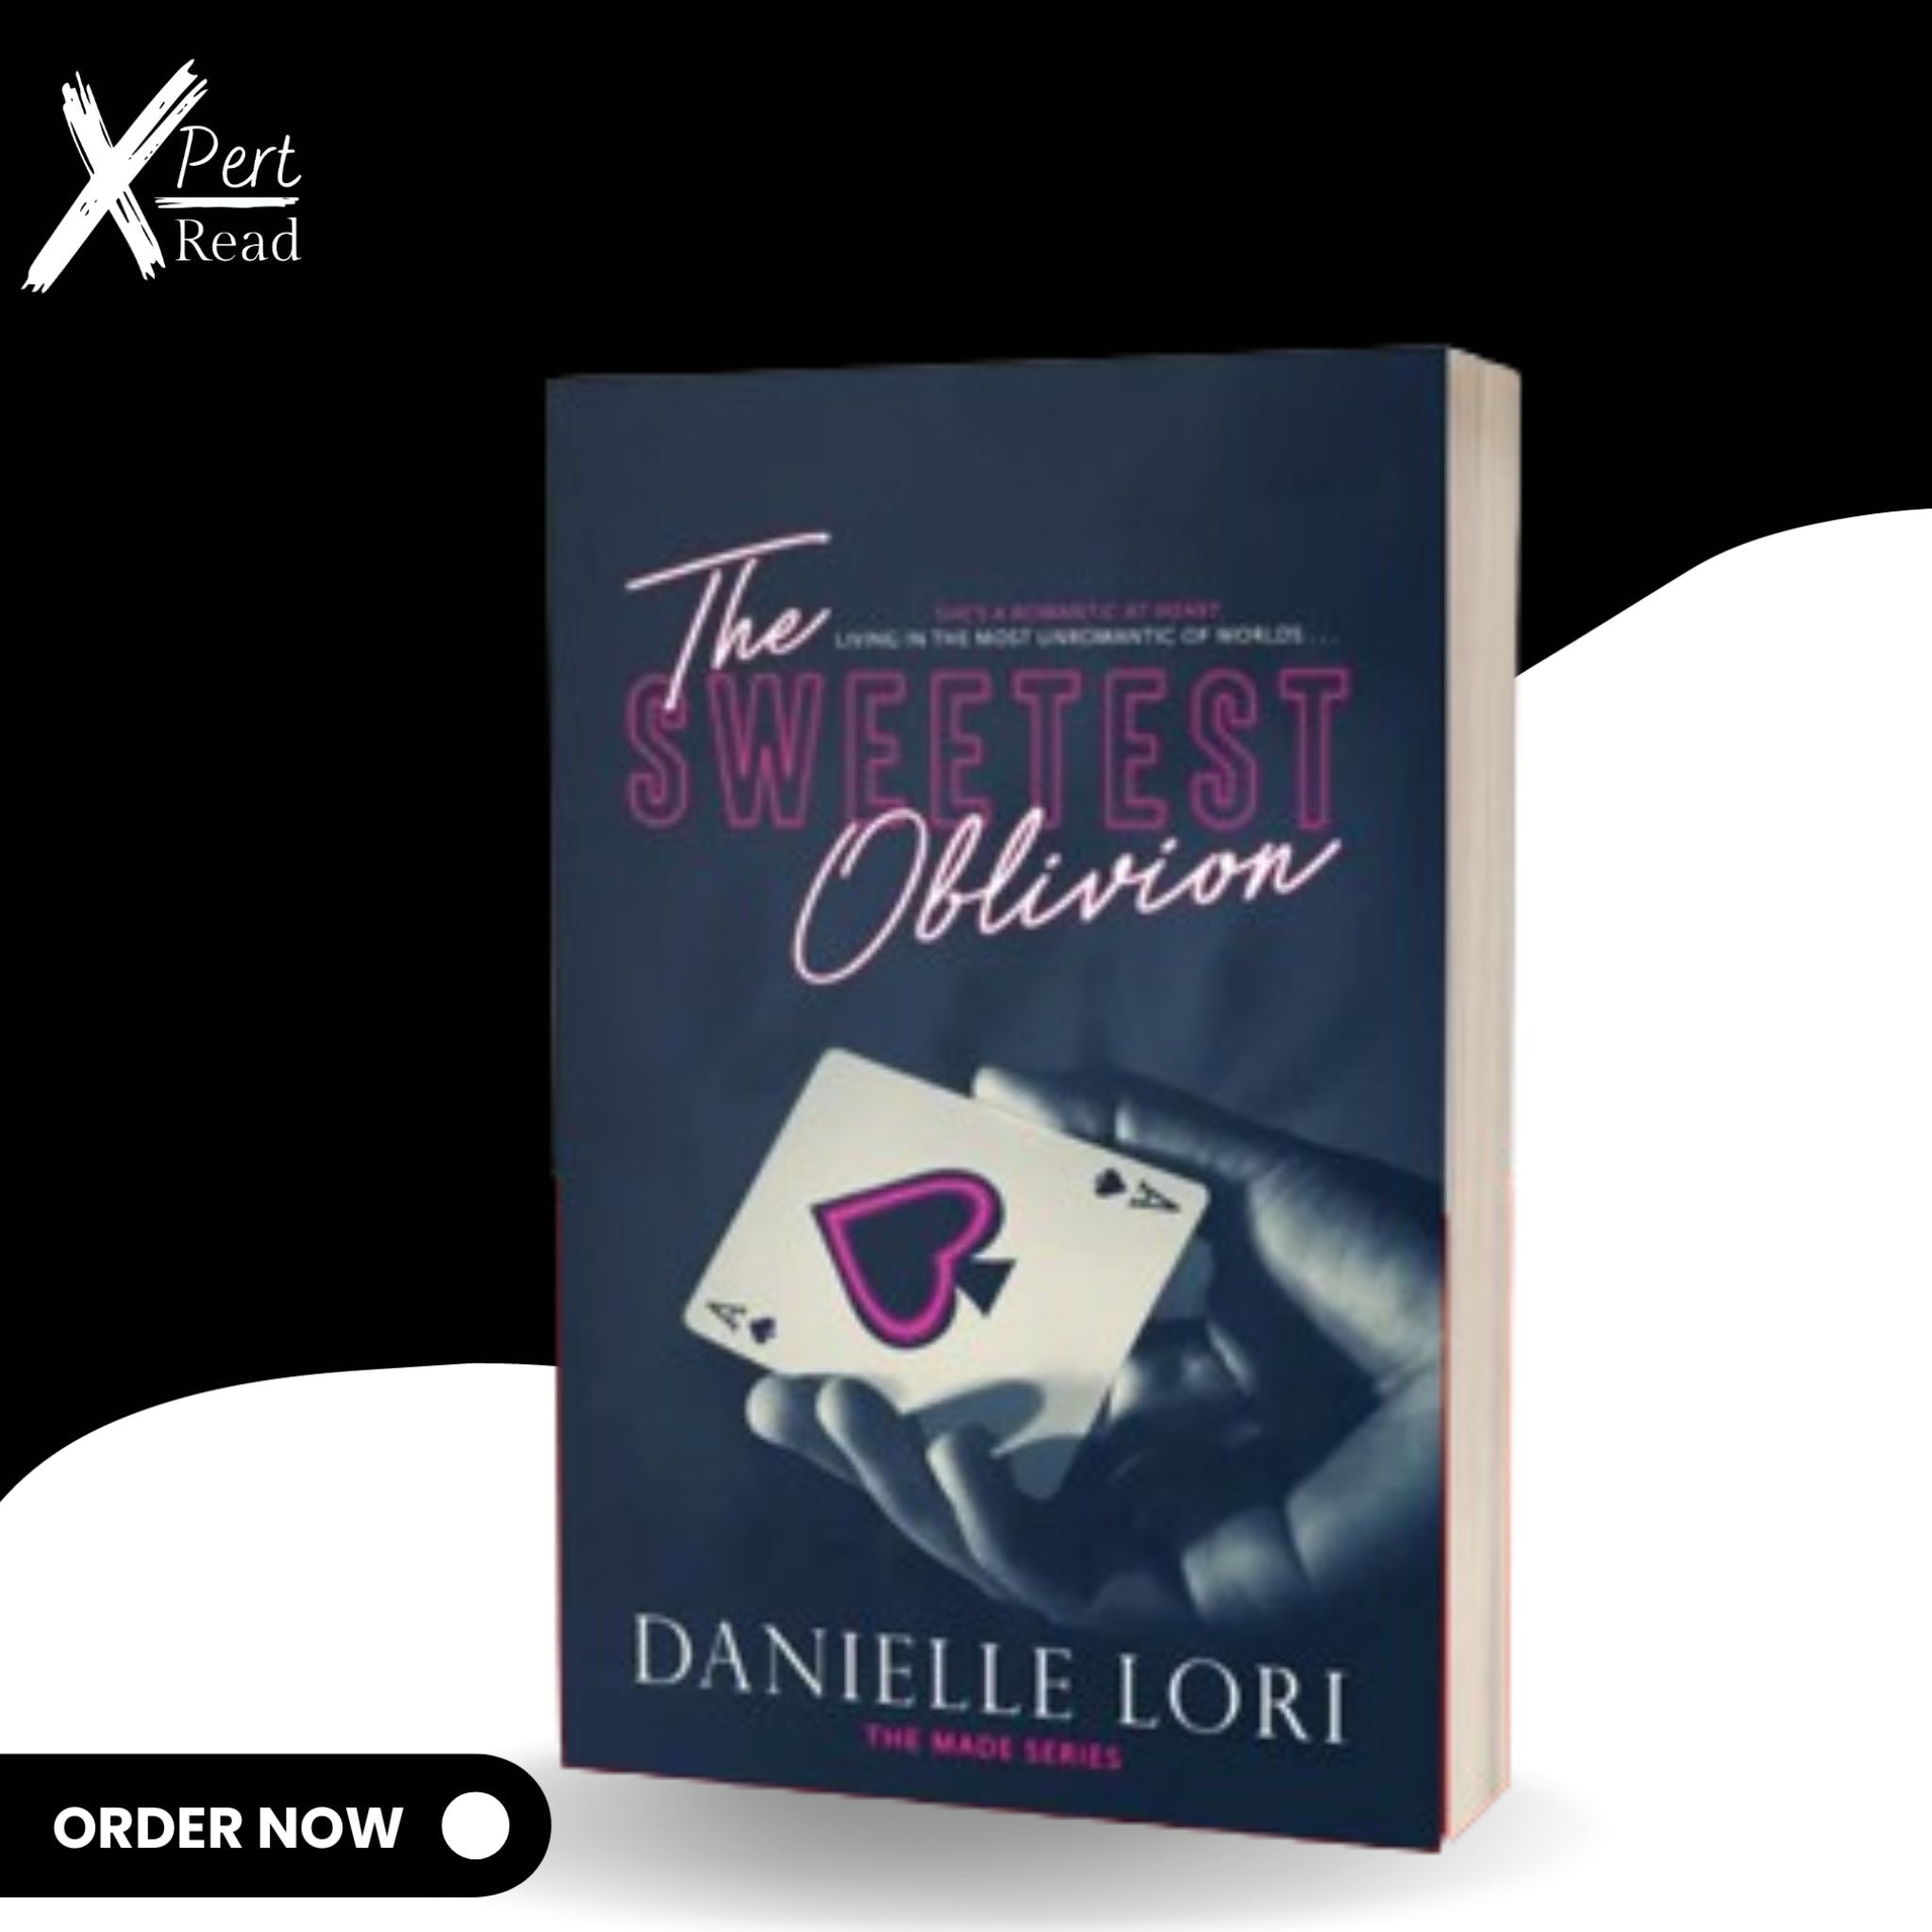 The Sweetest Oblivision (Made Series, Book 1) By Danielle Lori